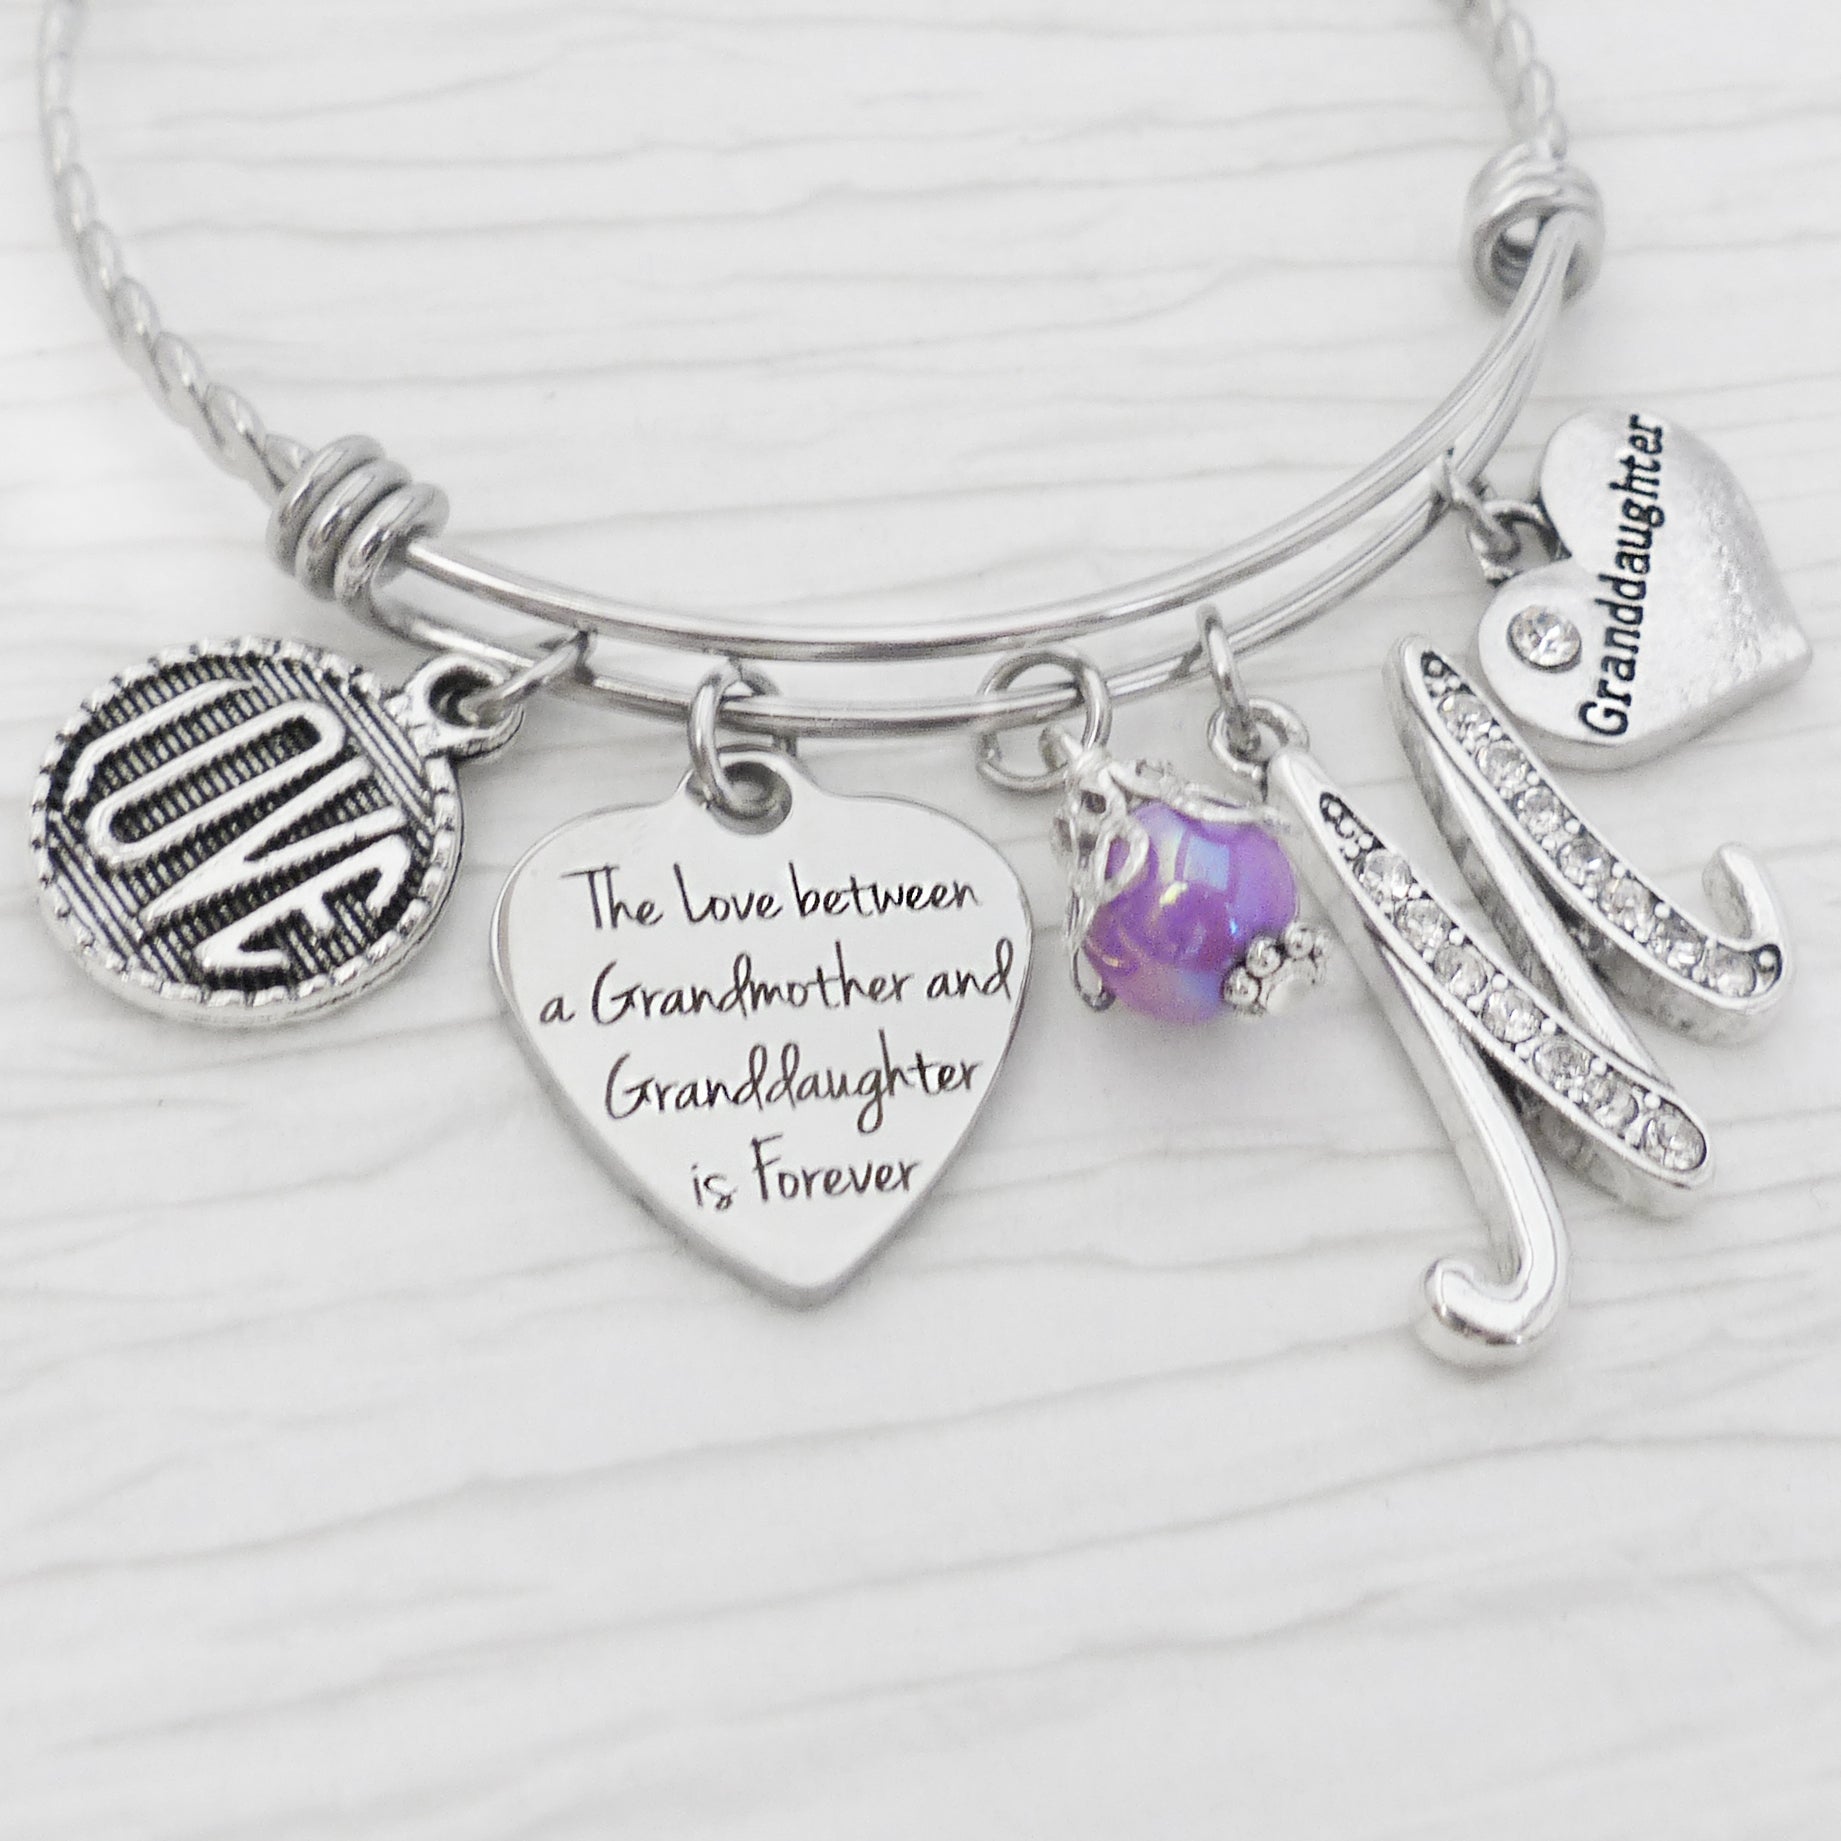 Granddaughter Gift, The love between a Grandmother and Granddaughter is forever-Bracelet Jewelry